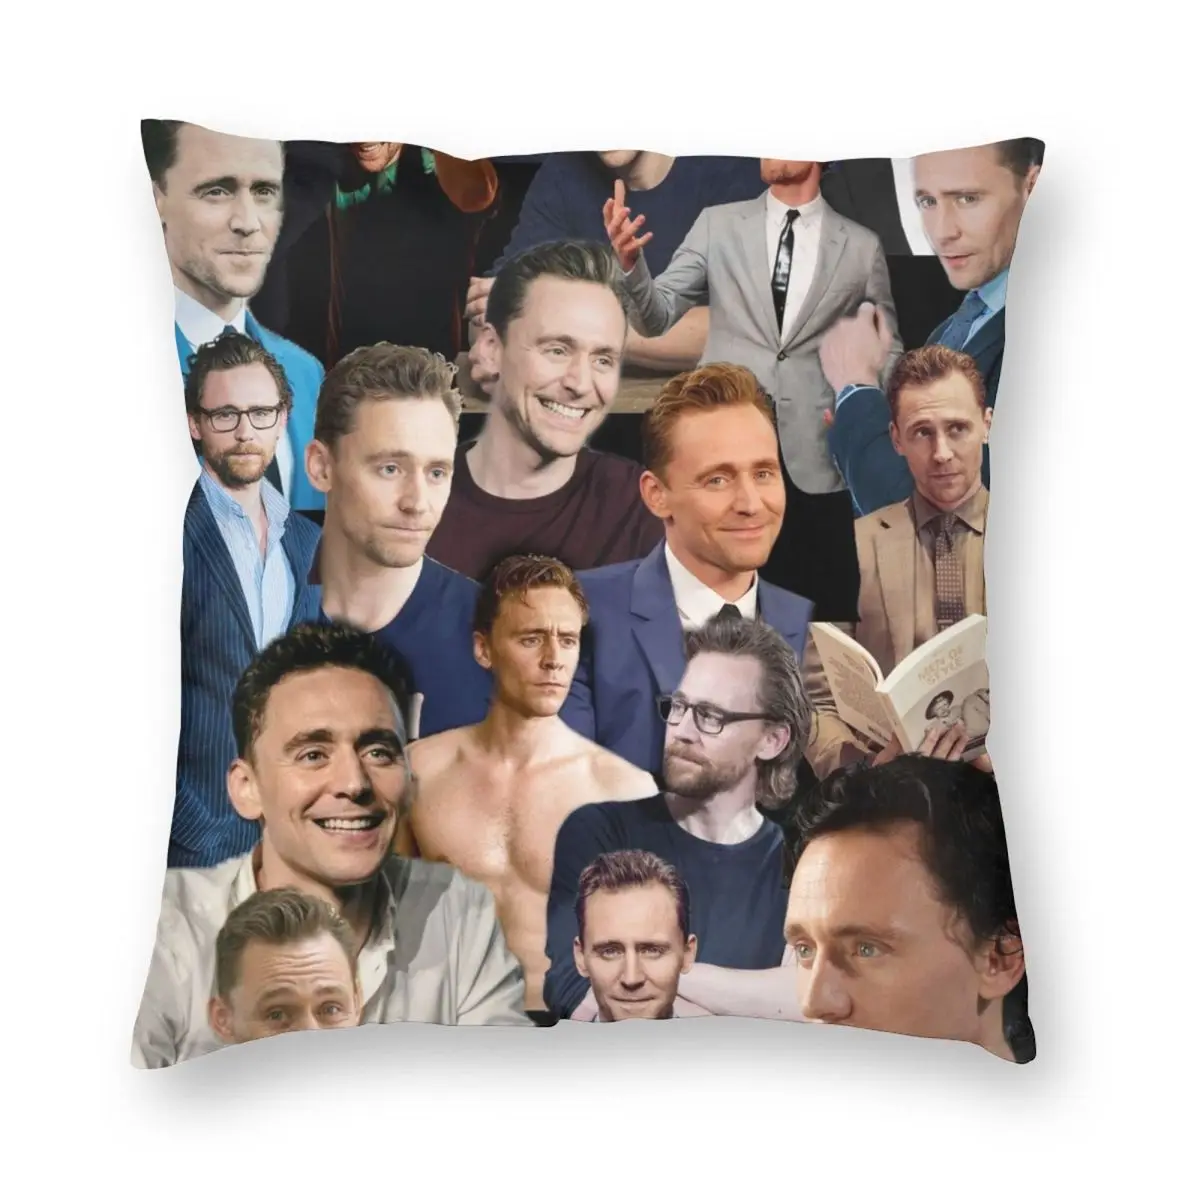 

Tom Hiddleston Photo Collage Pillowcase Soft Polyester Cushion Cover Gift Pillow Case Cover Home Square 40X40cm